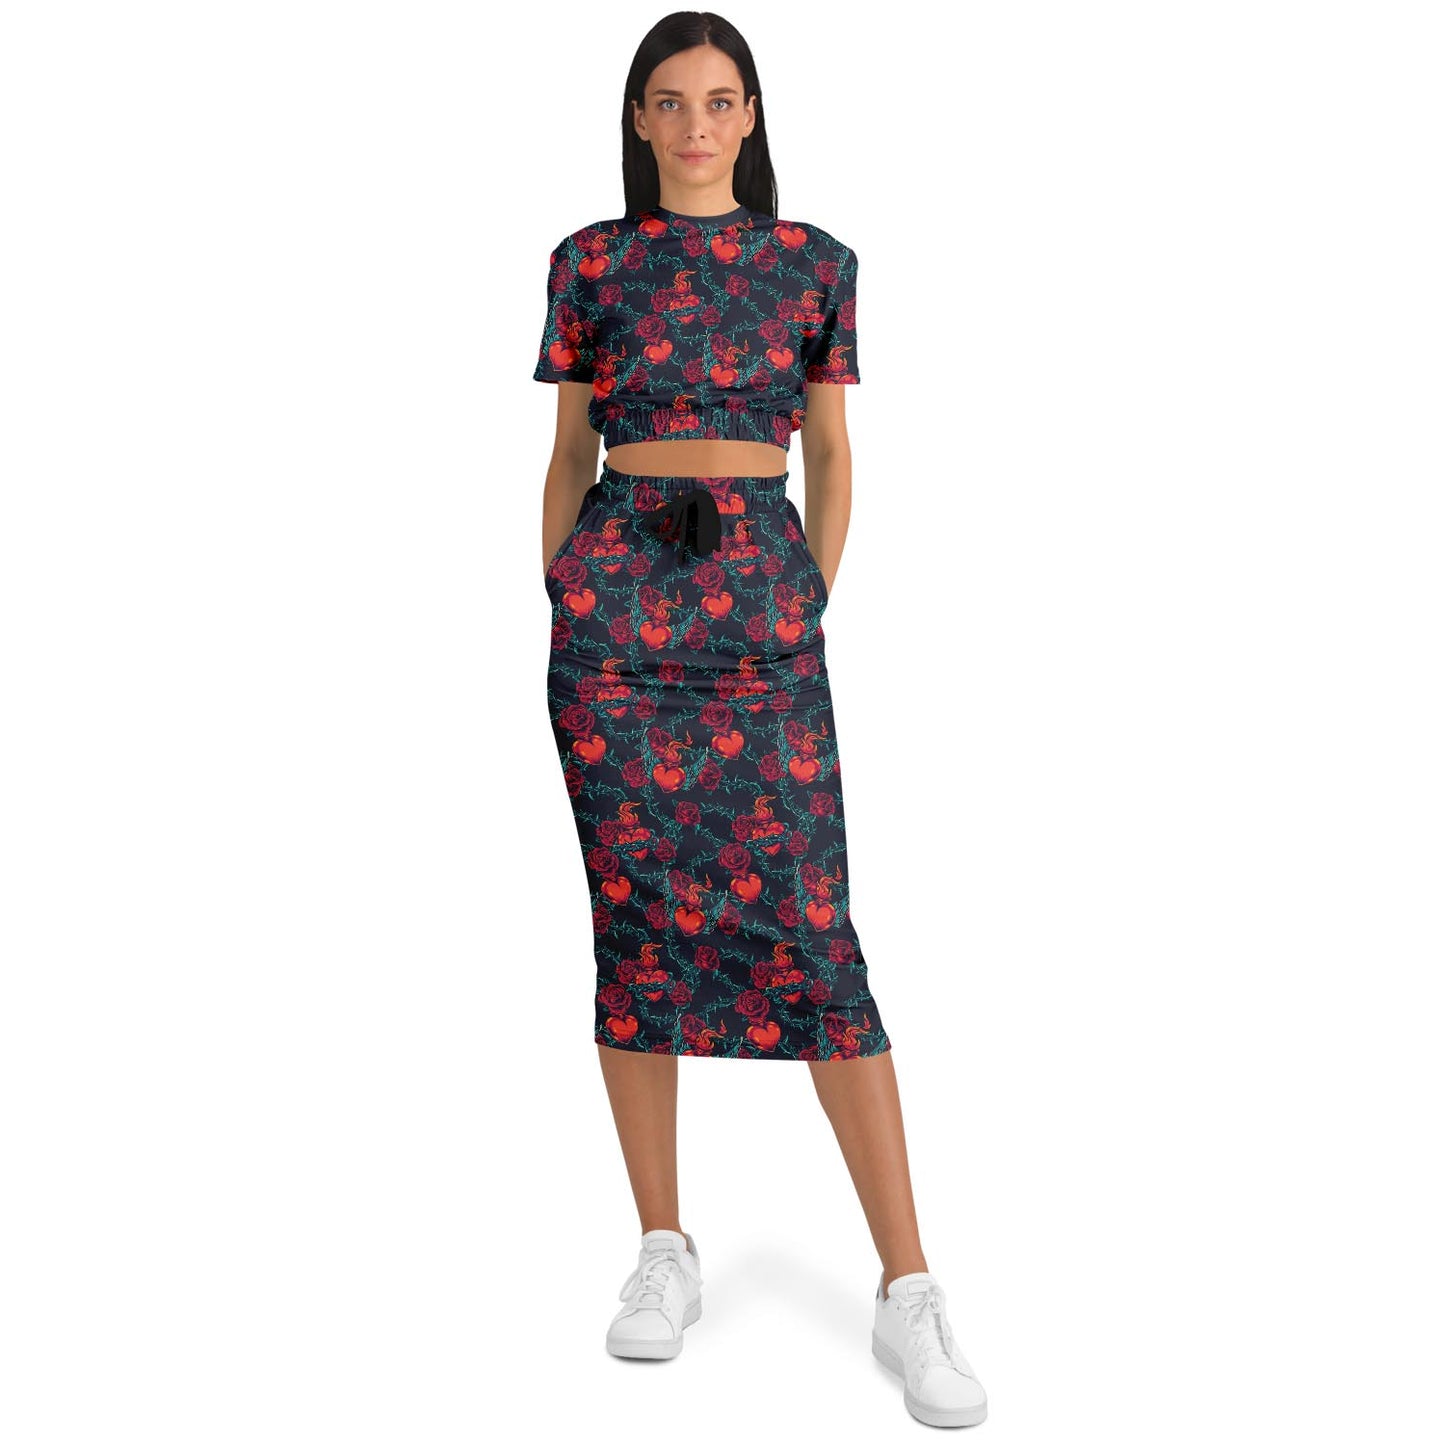 Fiery Hearts and Roses Sweatshirt and Skirt Set